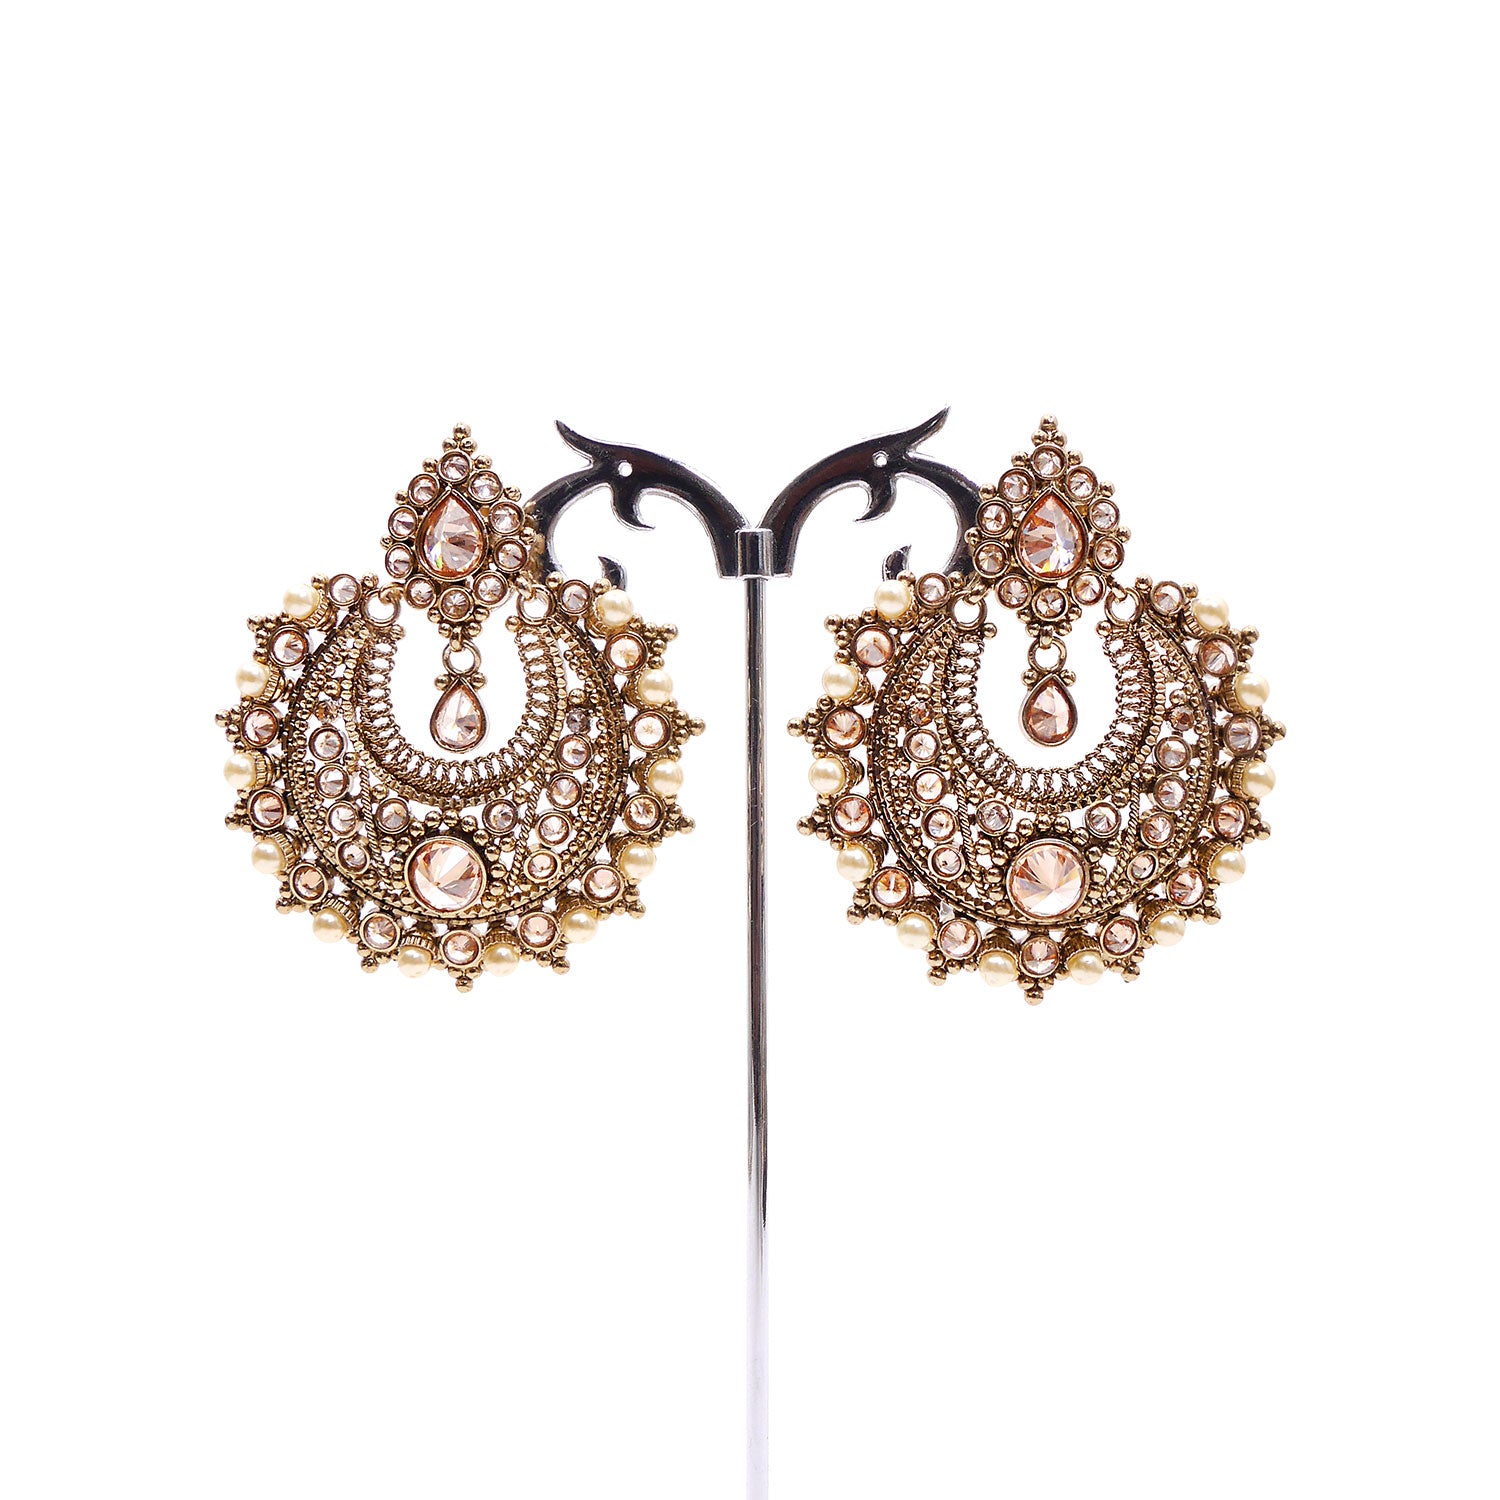 Antique Gold and Pearl Chandbali Earrings